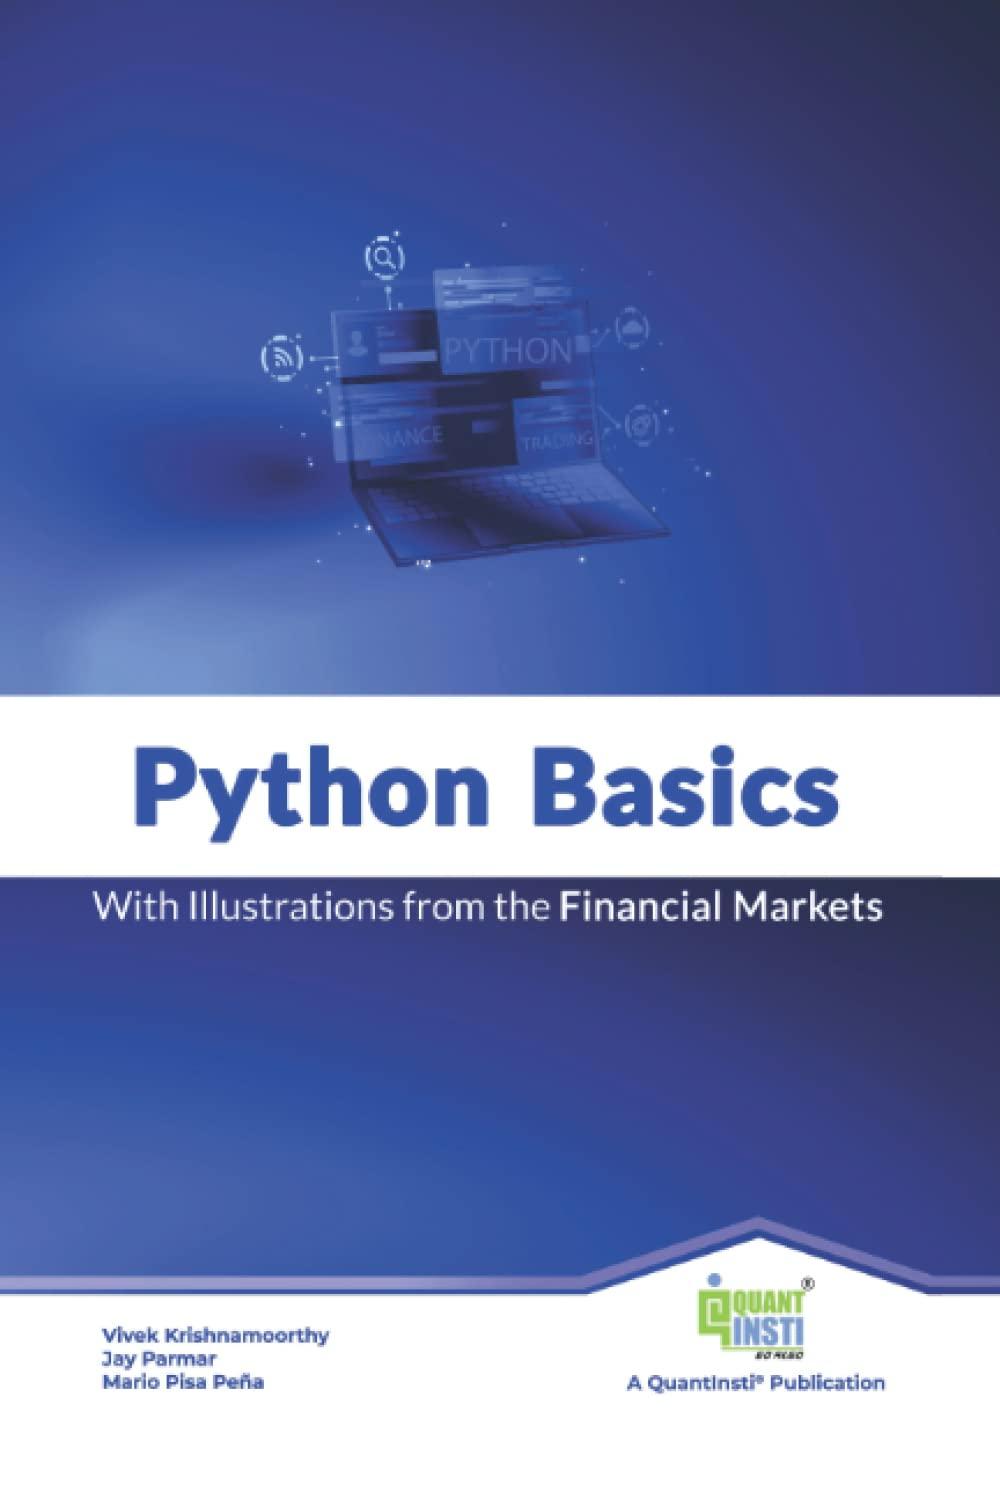 python basics with illustration from the financial markets 1st edition quantinsti quantitative learning, jay